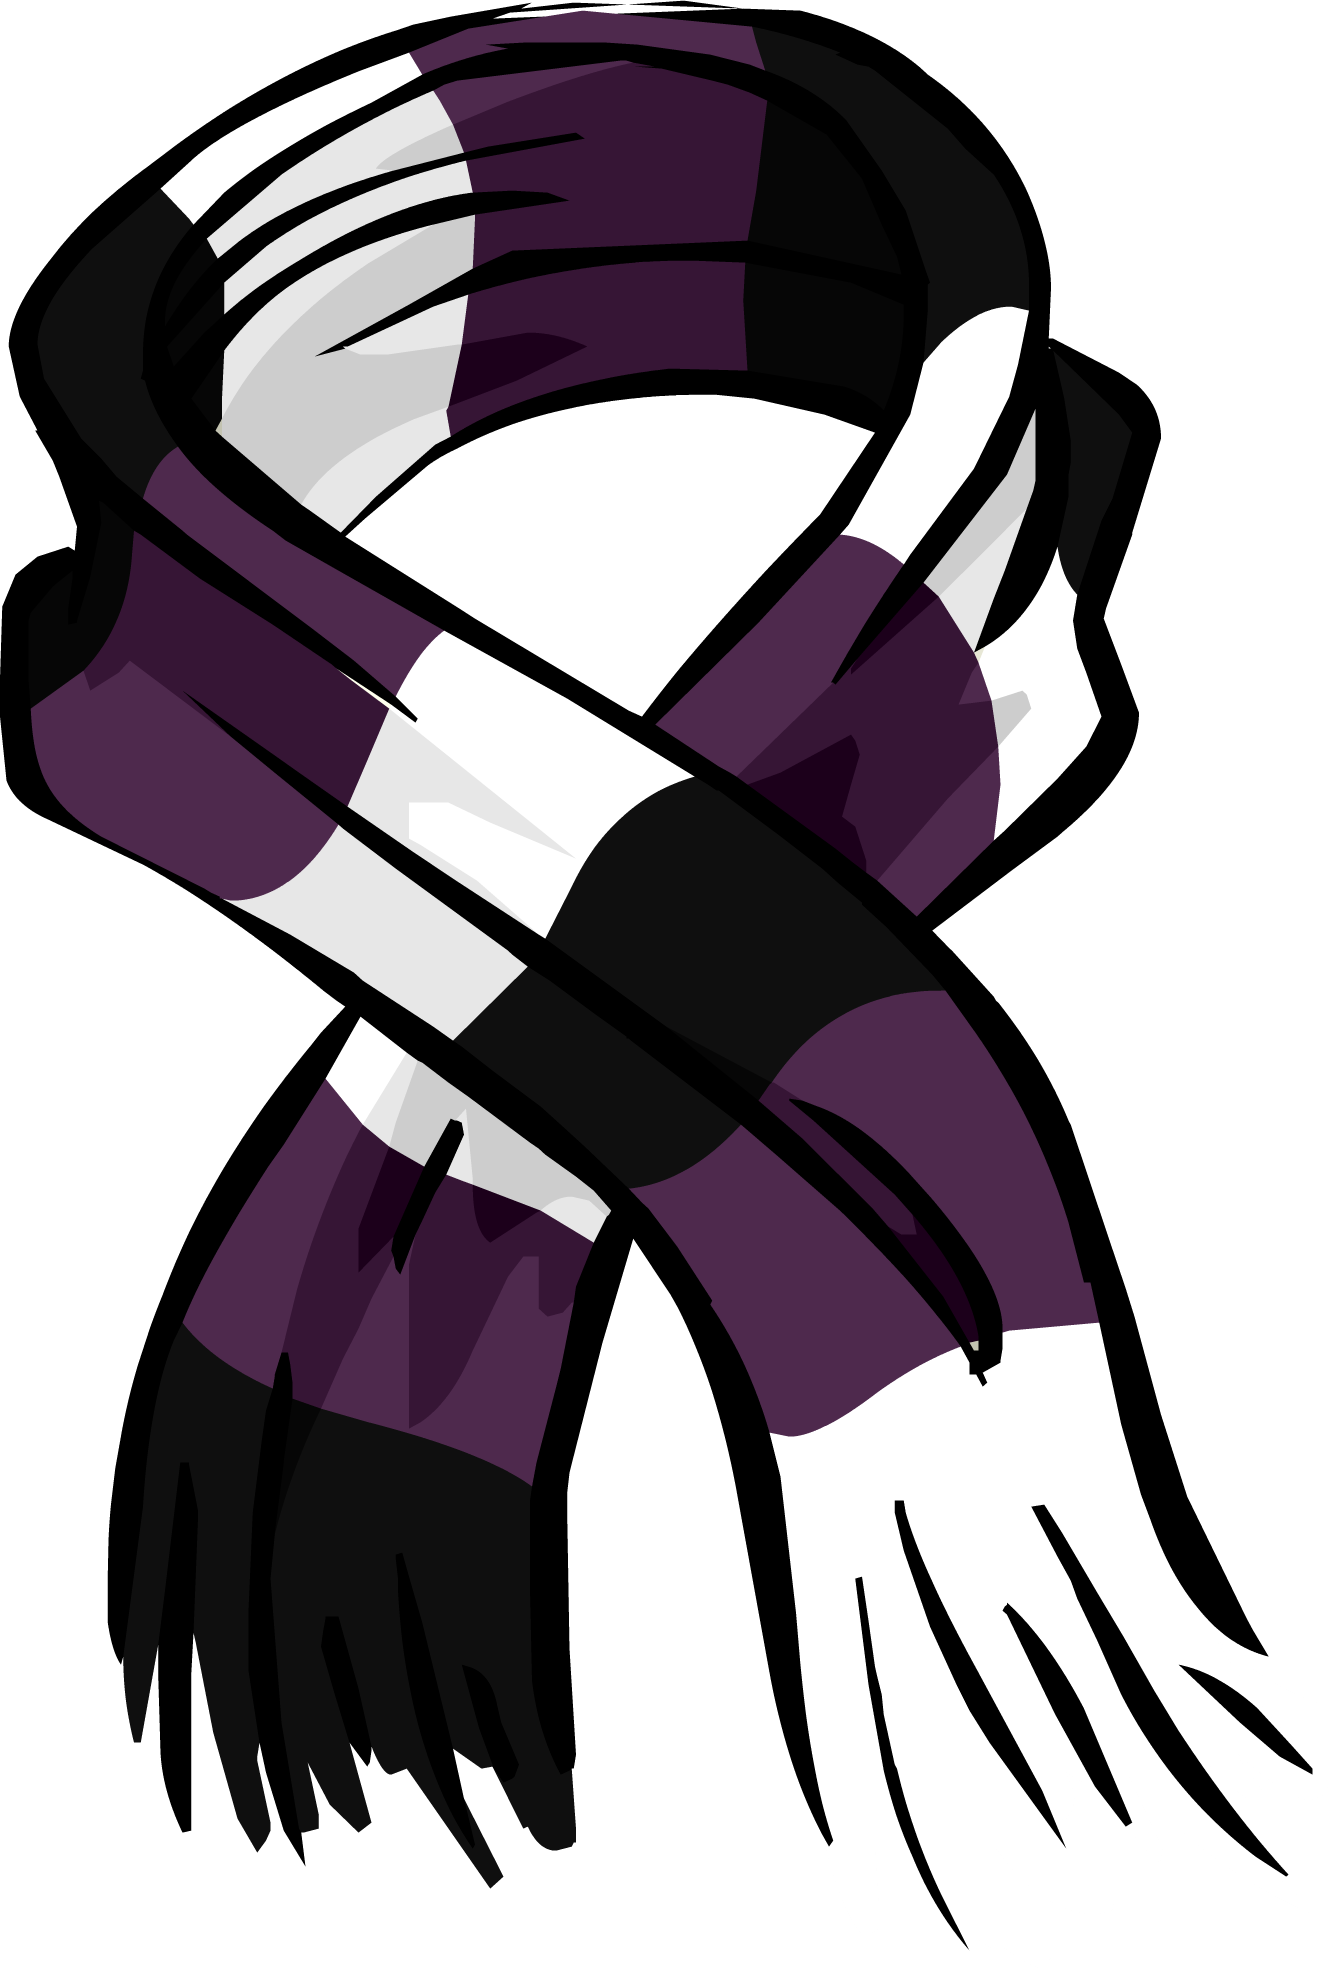 Striped Winter Scarf Illustration.png